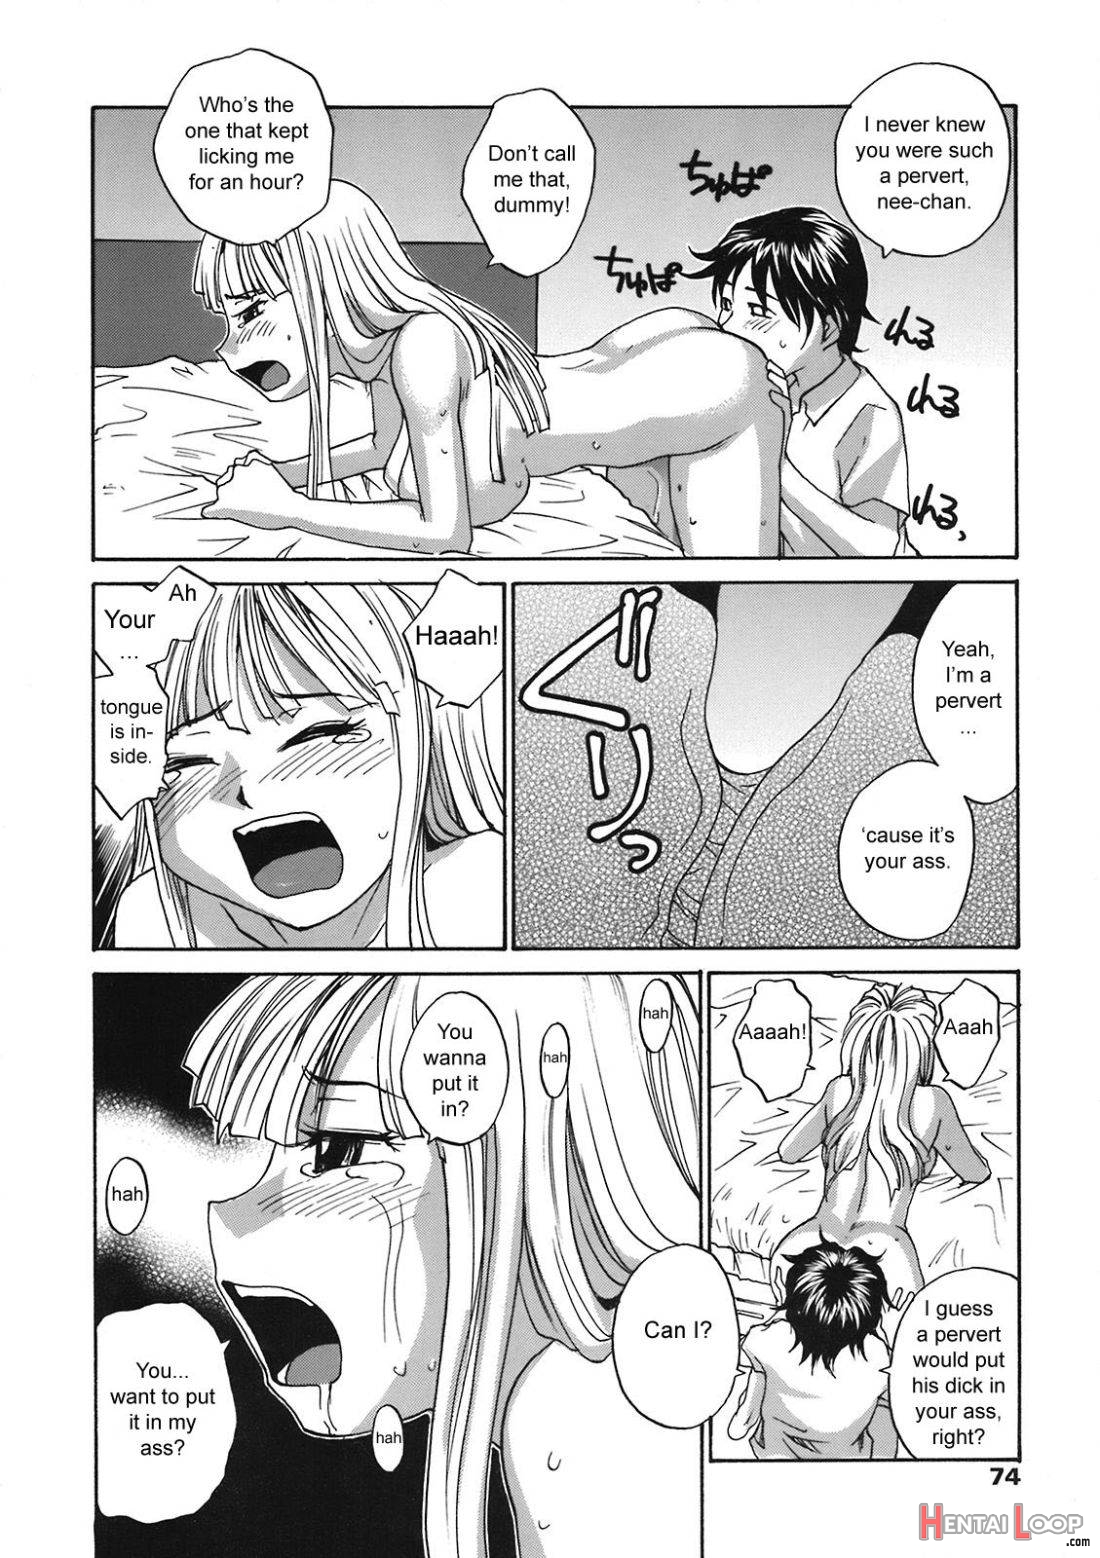 Back to Nee-chan page 8